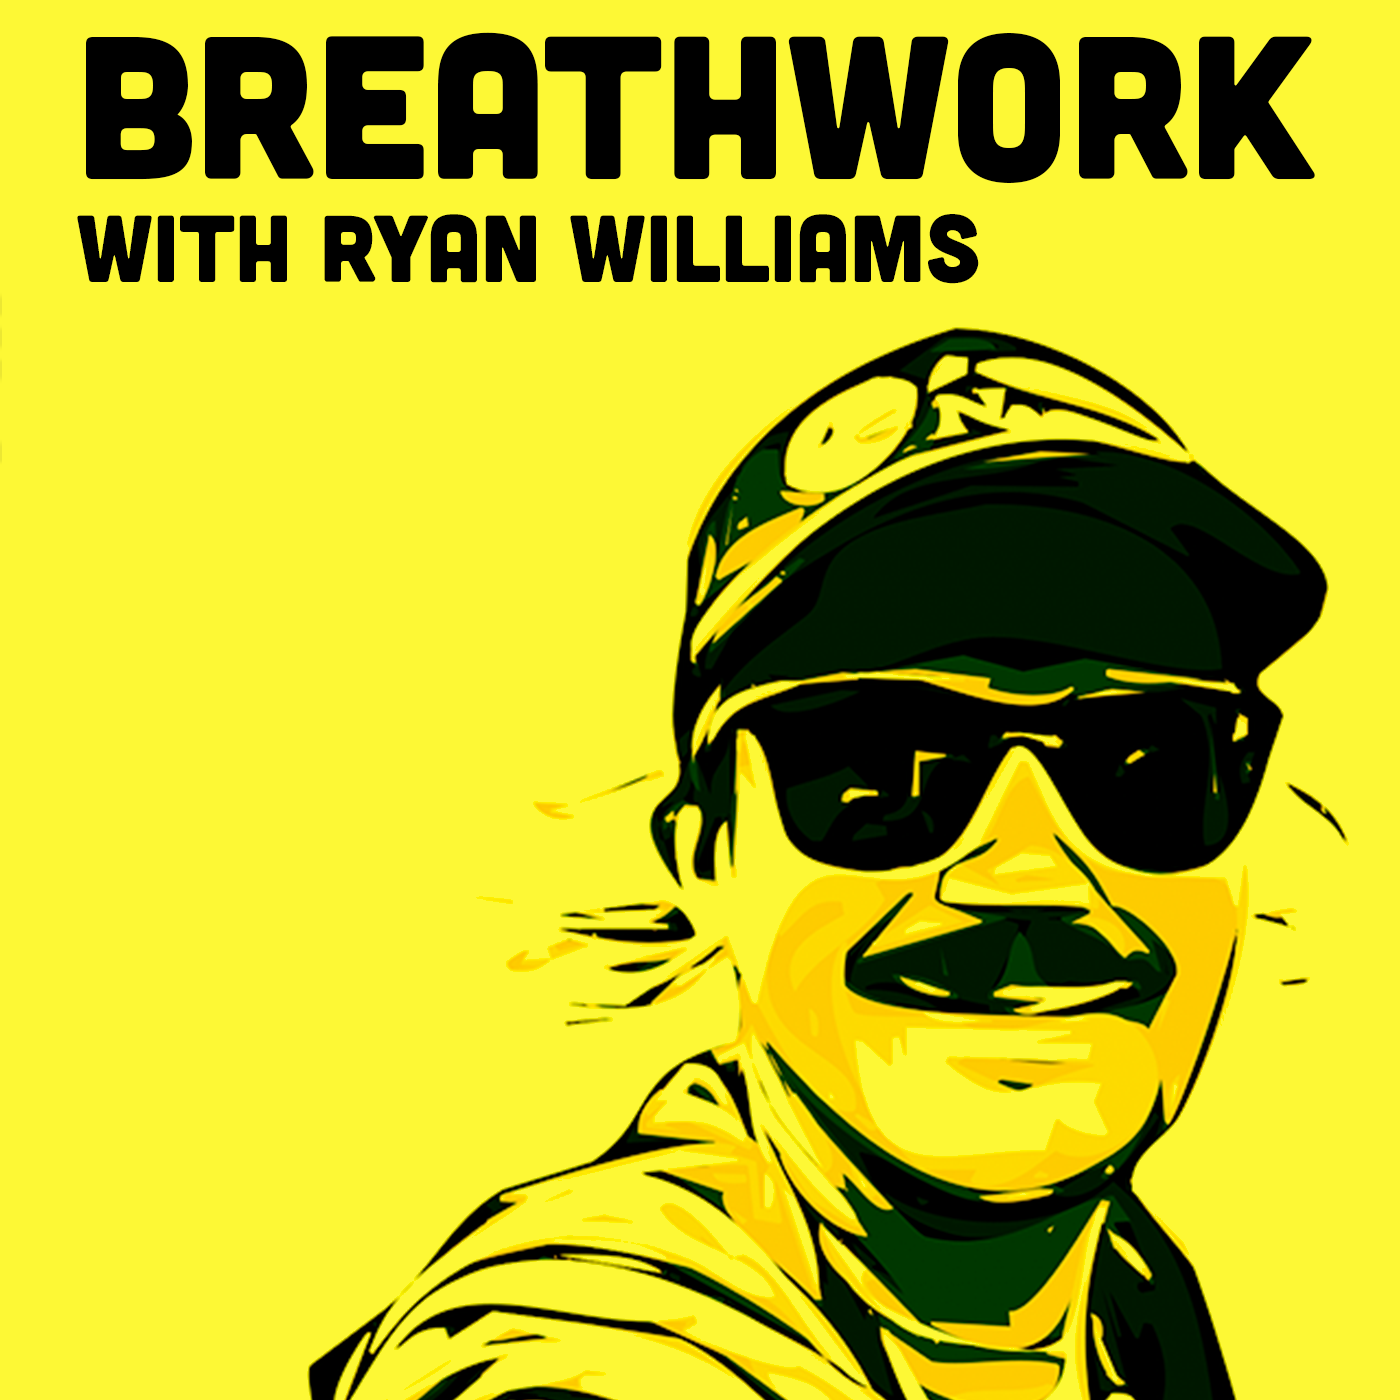 About Breathwork with Ryan